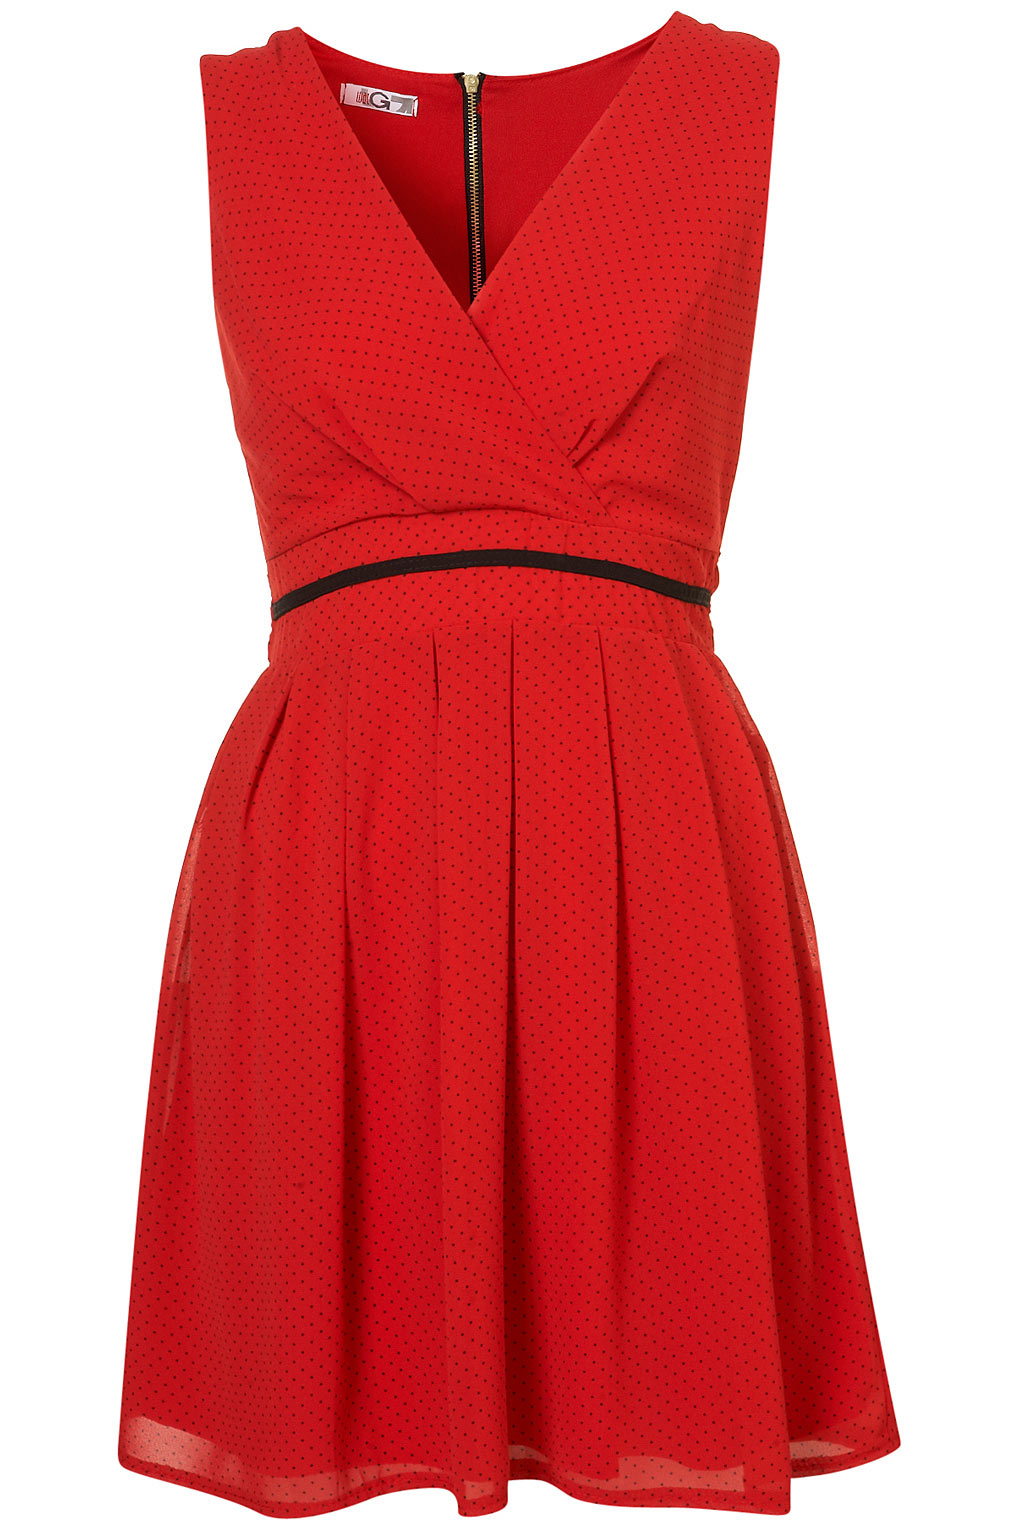 Topshop Polka Dot Chiffon Dress By Wal G in Red | Lyst